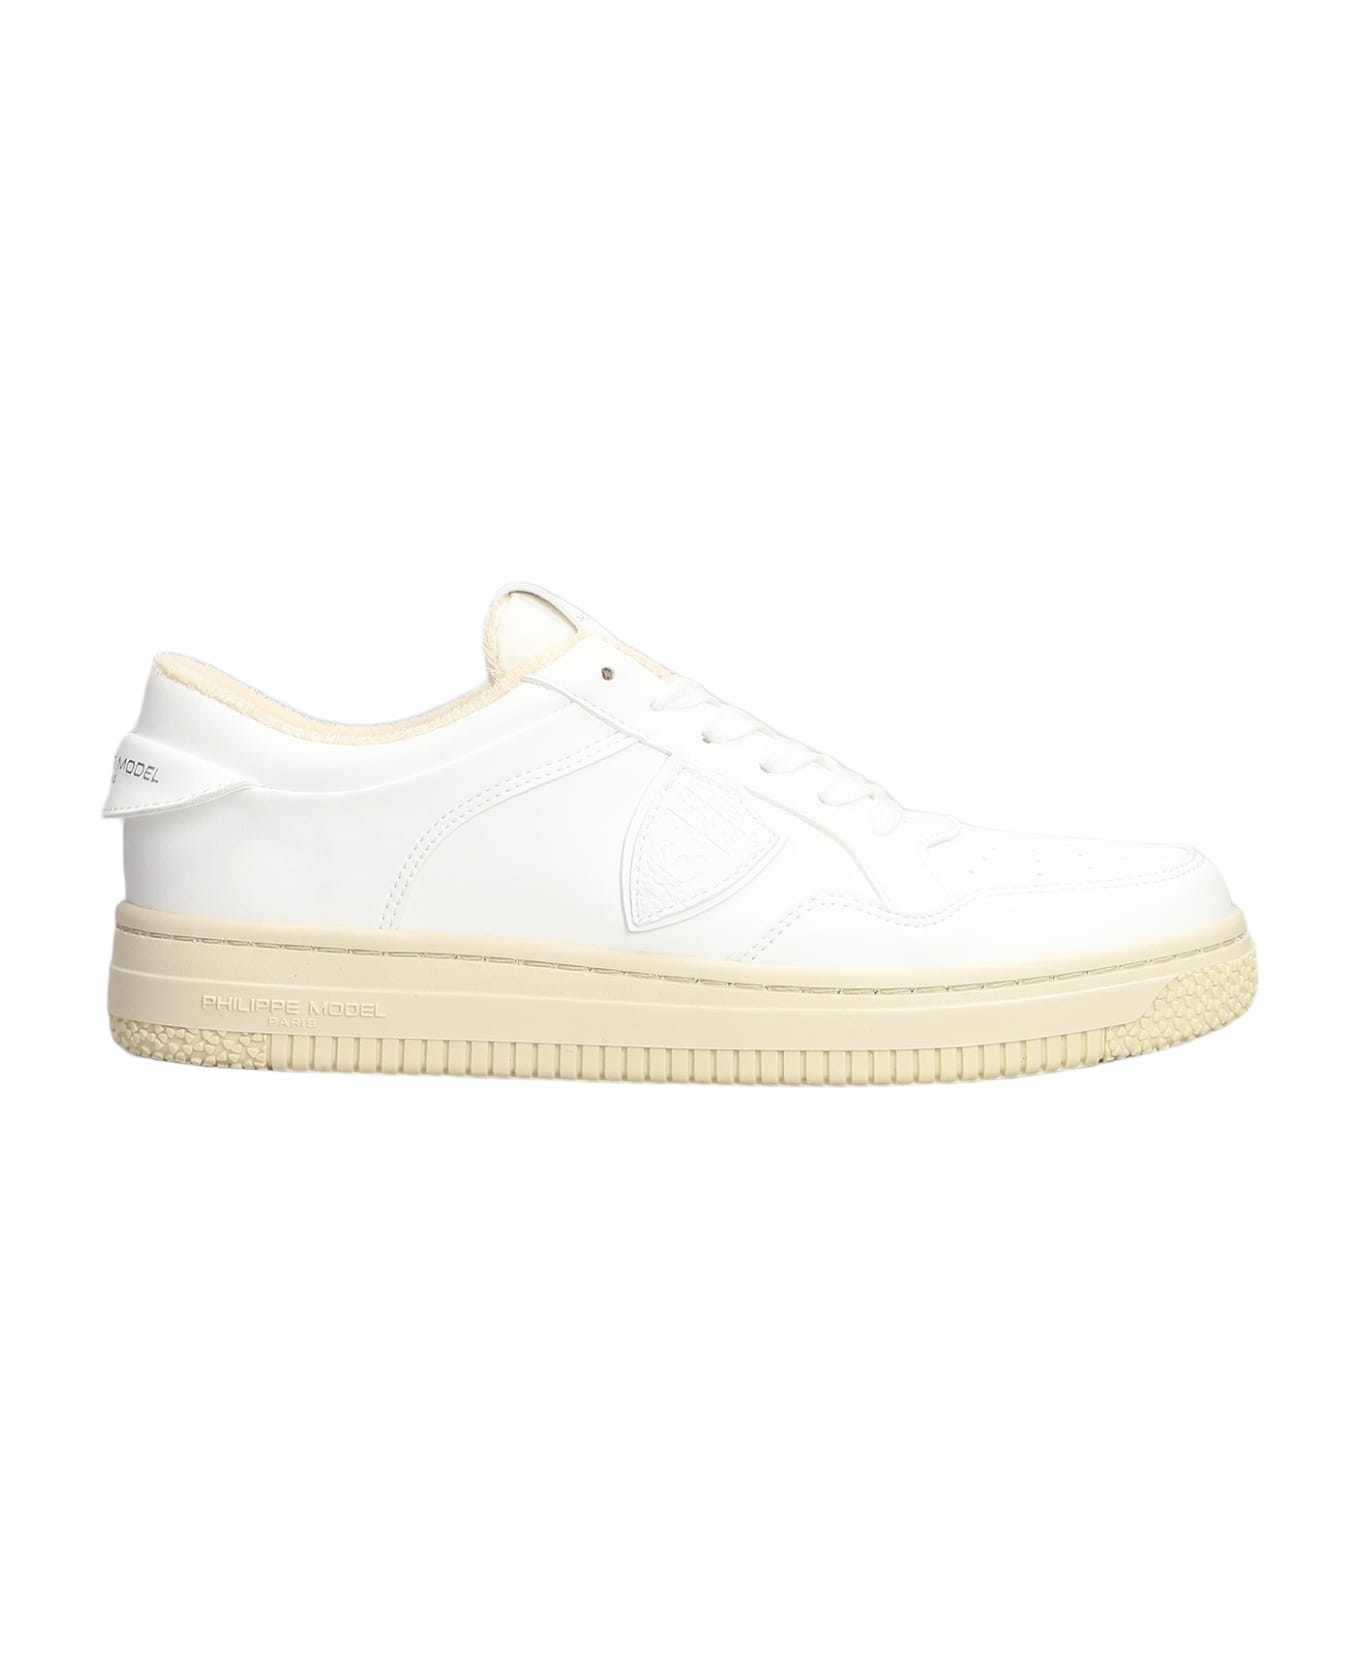 Philippe Model Lyon Sneakers In White Leather - White スニーカー